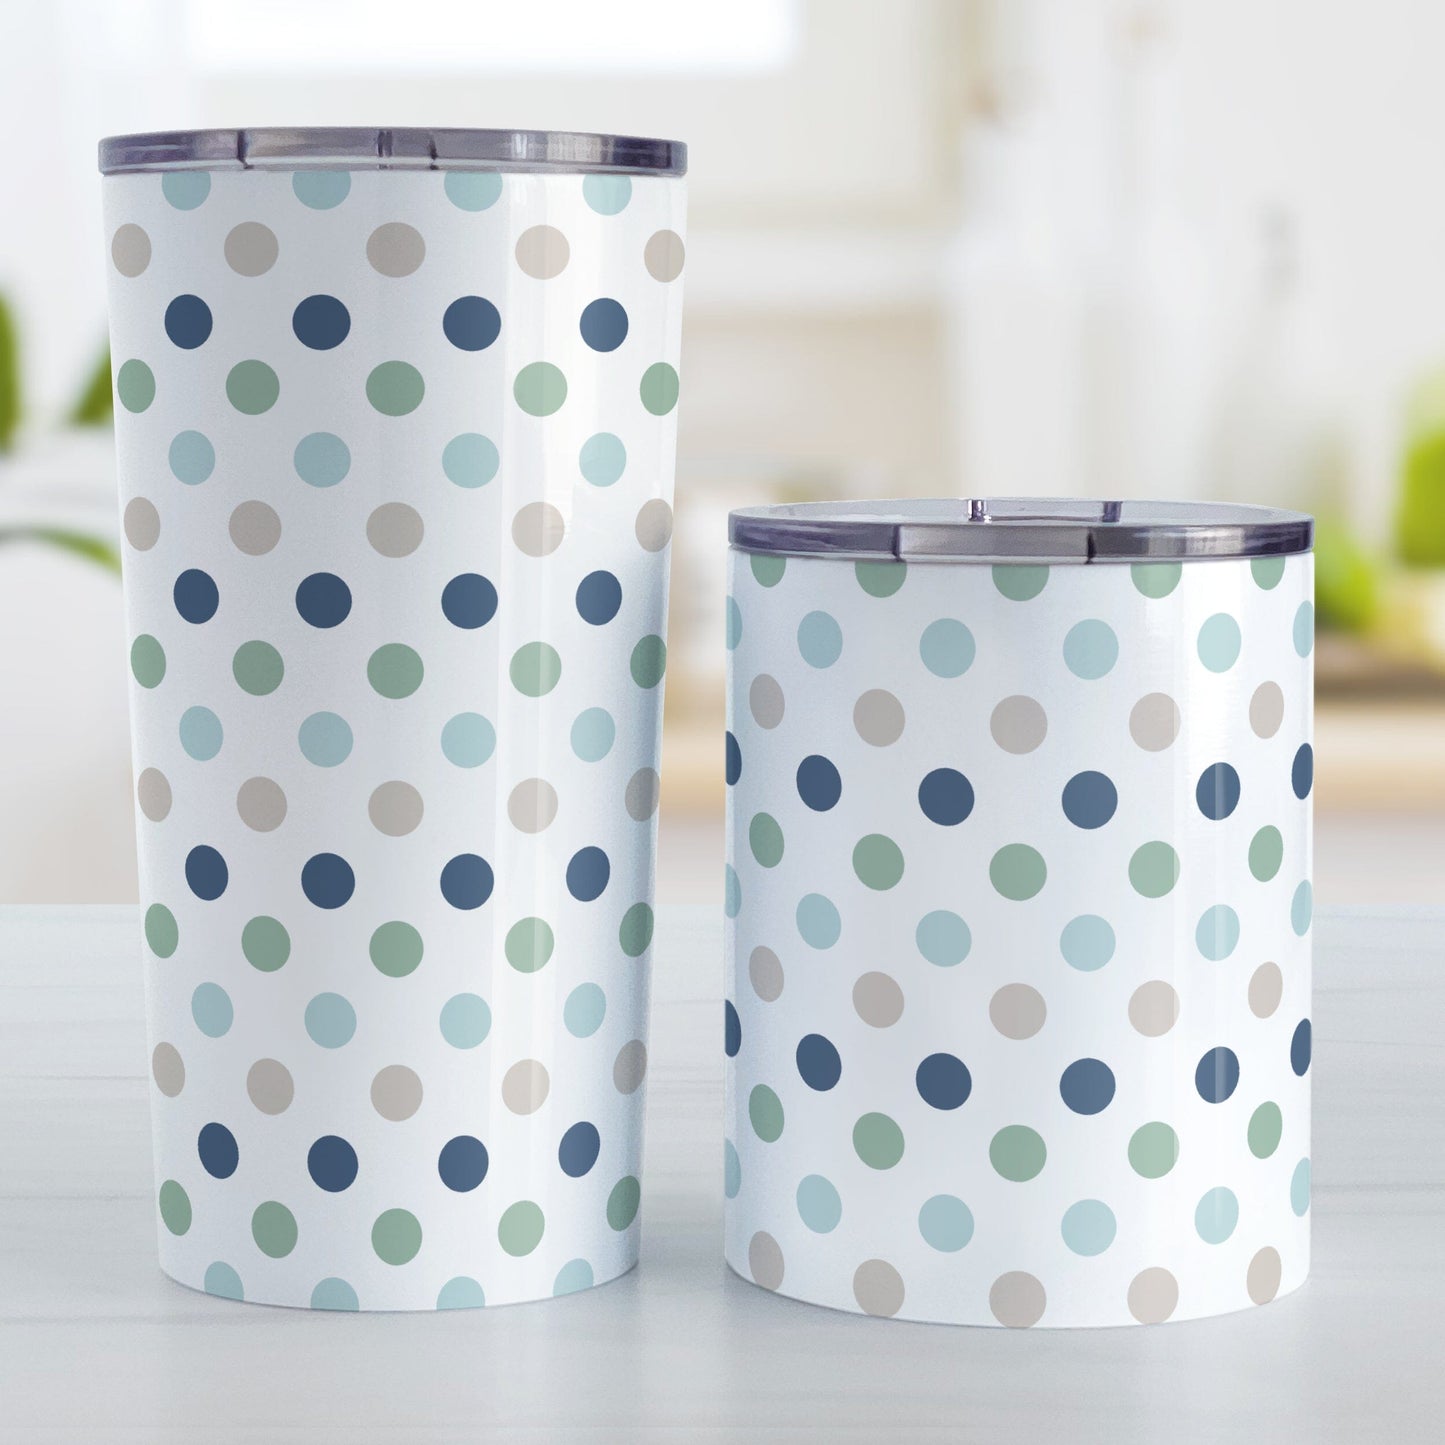 Coastal Polka Dots Tumbler Cups (20oz of 10oz) at Amy's Coffee Mugs. Stainless steel tumbler cups designed with a pattern of polka dots in a coastal color scheme that wraps around the cups. Photo shows both sized cups on a table next to each other.